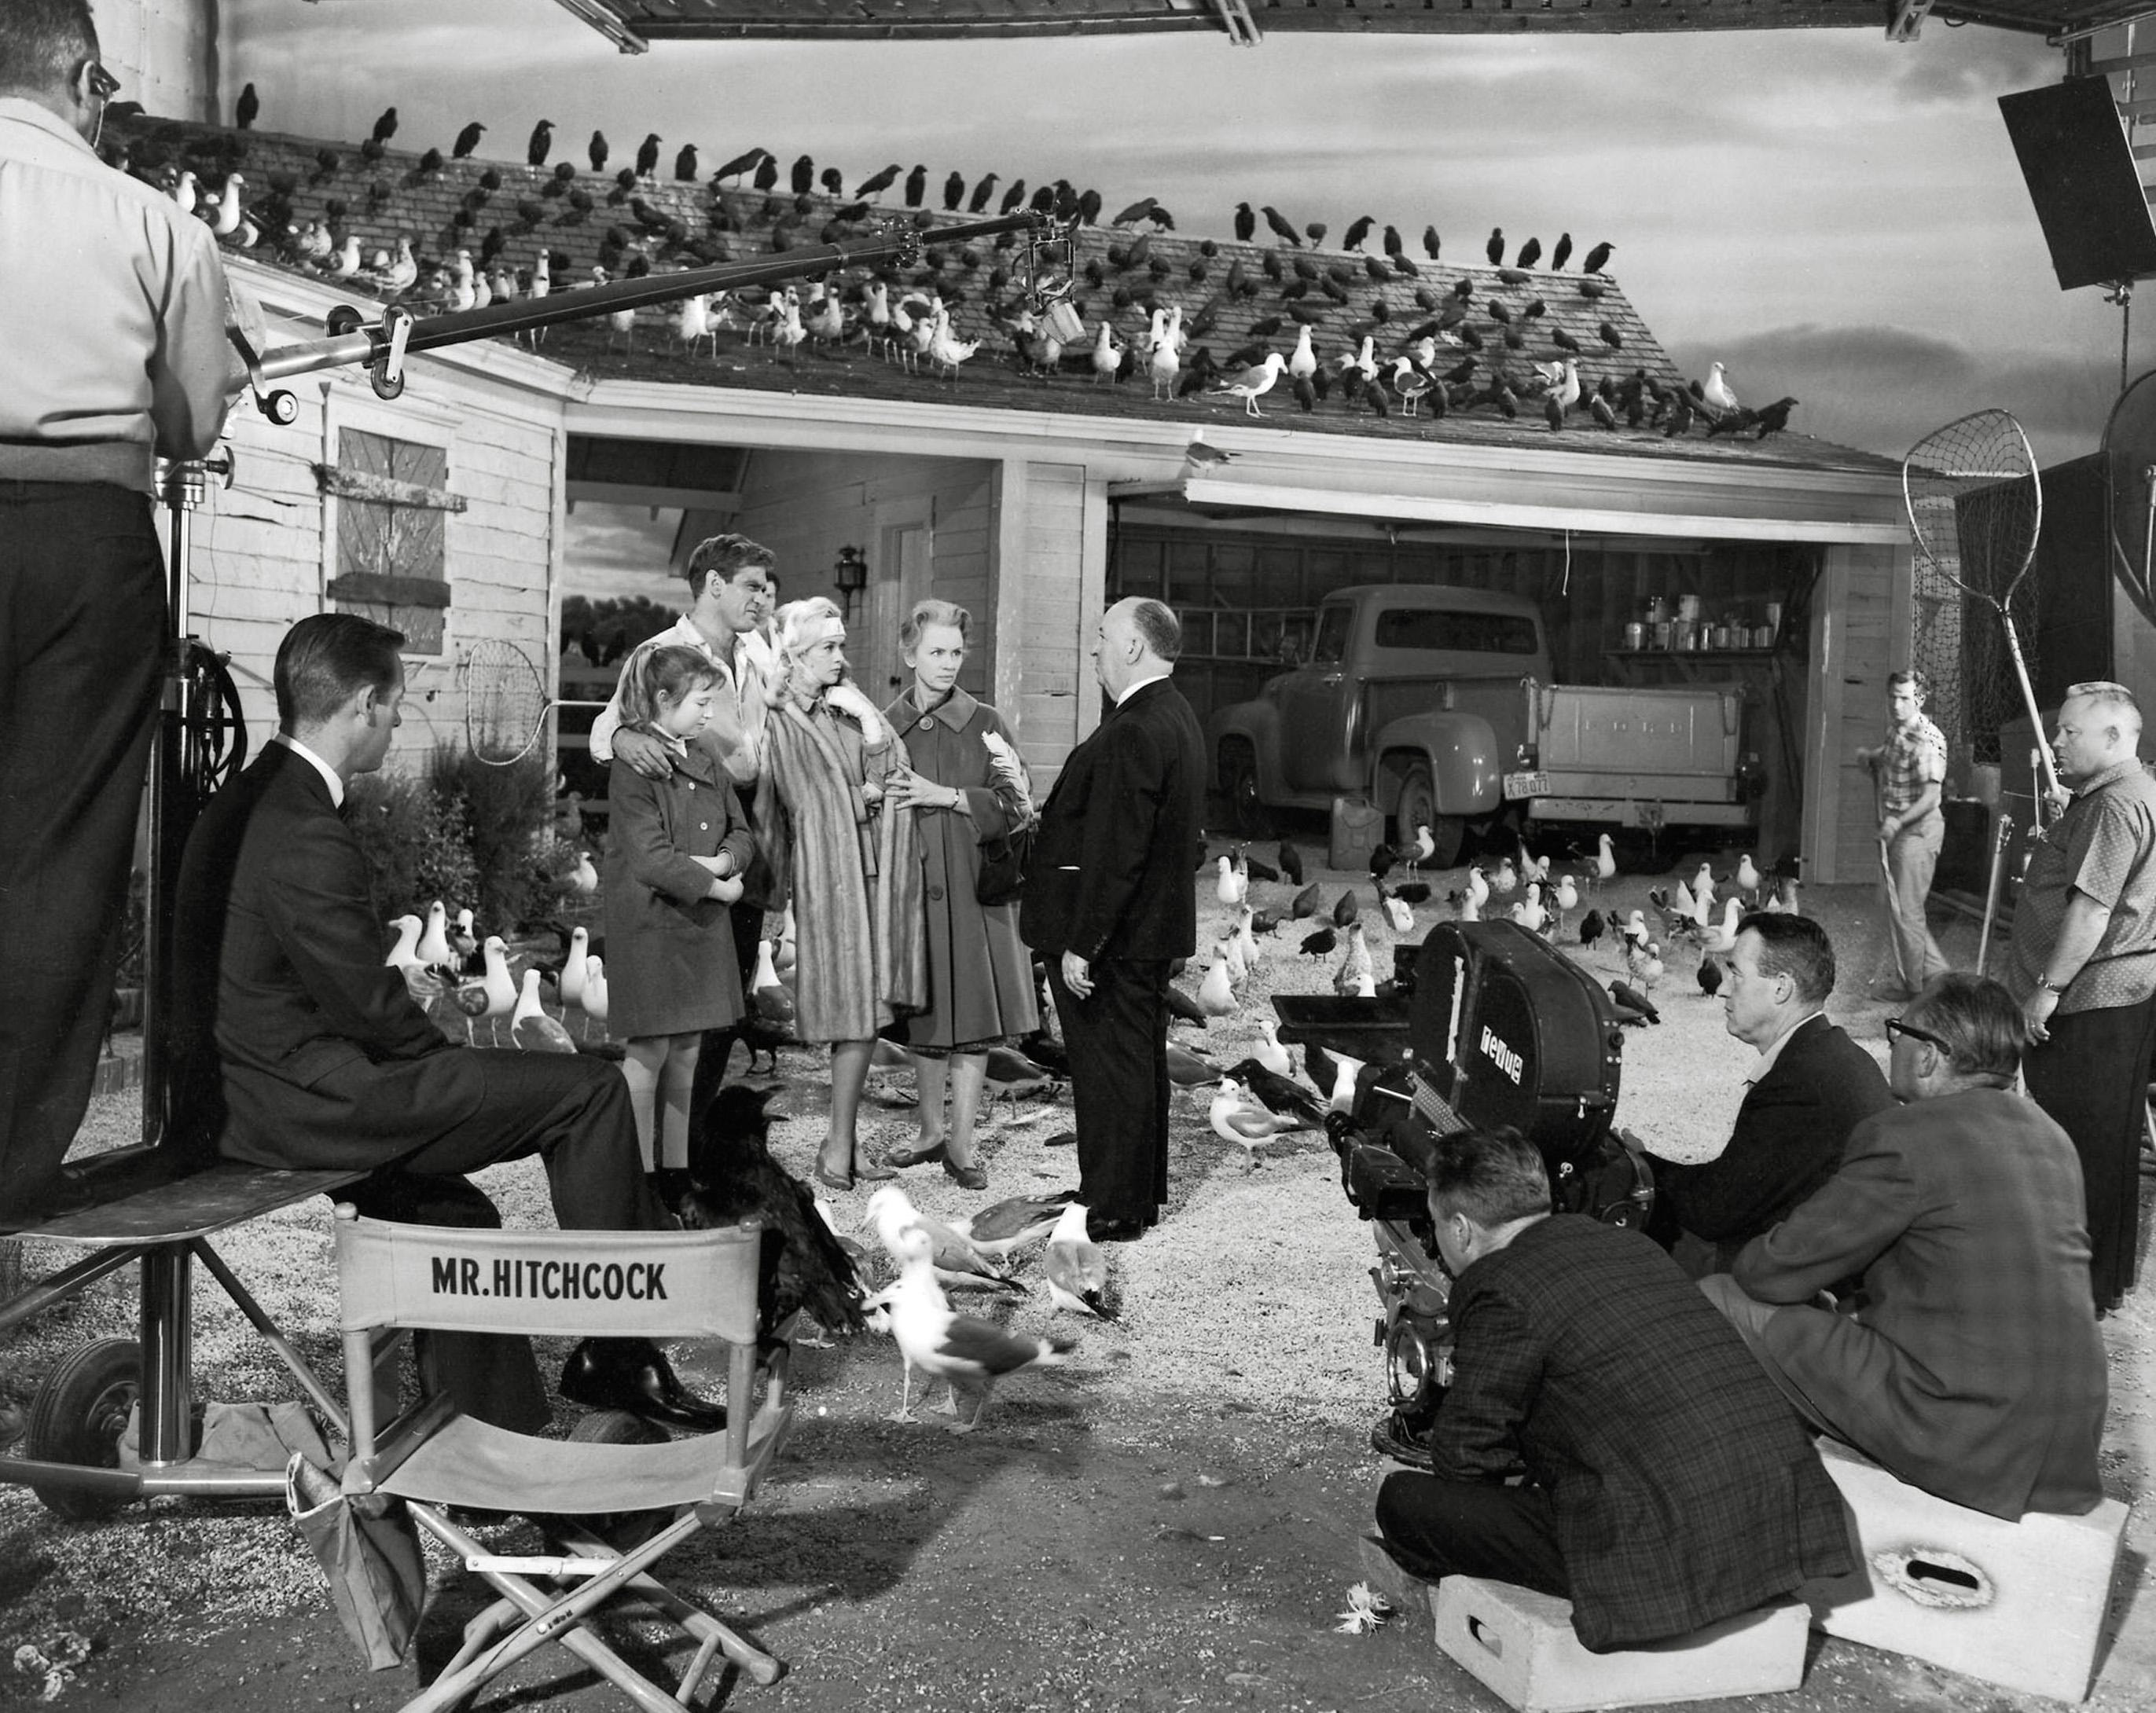 Alfred Hitchcock, Rod Taylor, Tippi Hedren, Jessica Tandy, and Veronica Cartwright during production of 